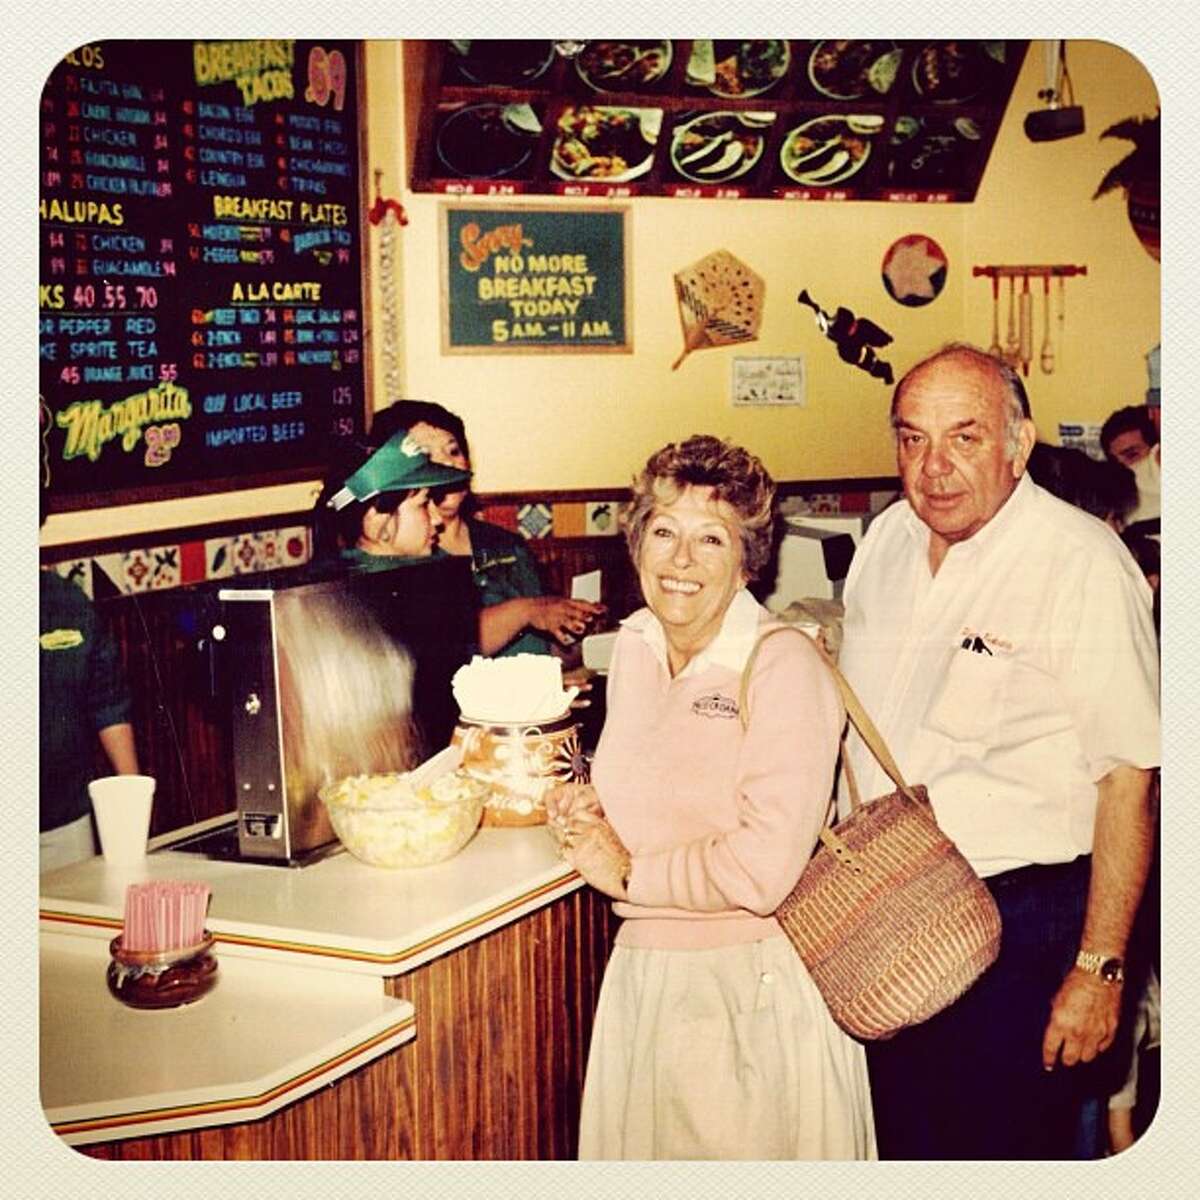 Taco Cabana founders Felix and Billie Jo Stehling in one of their restaurants.